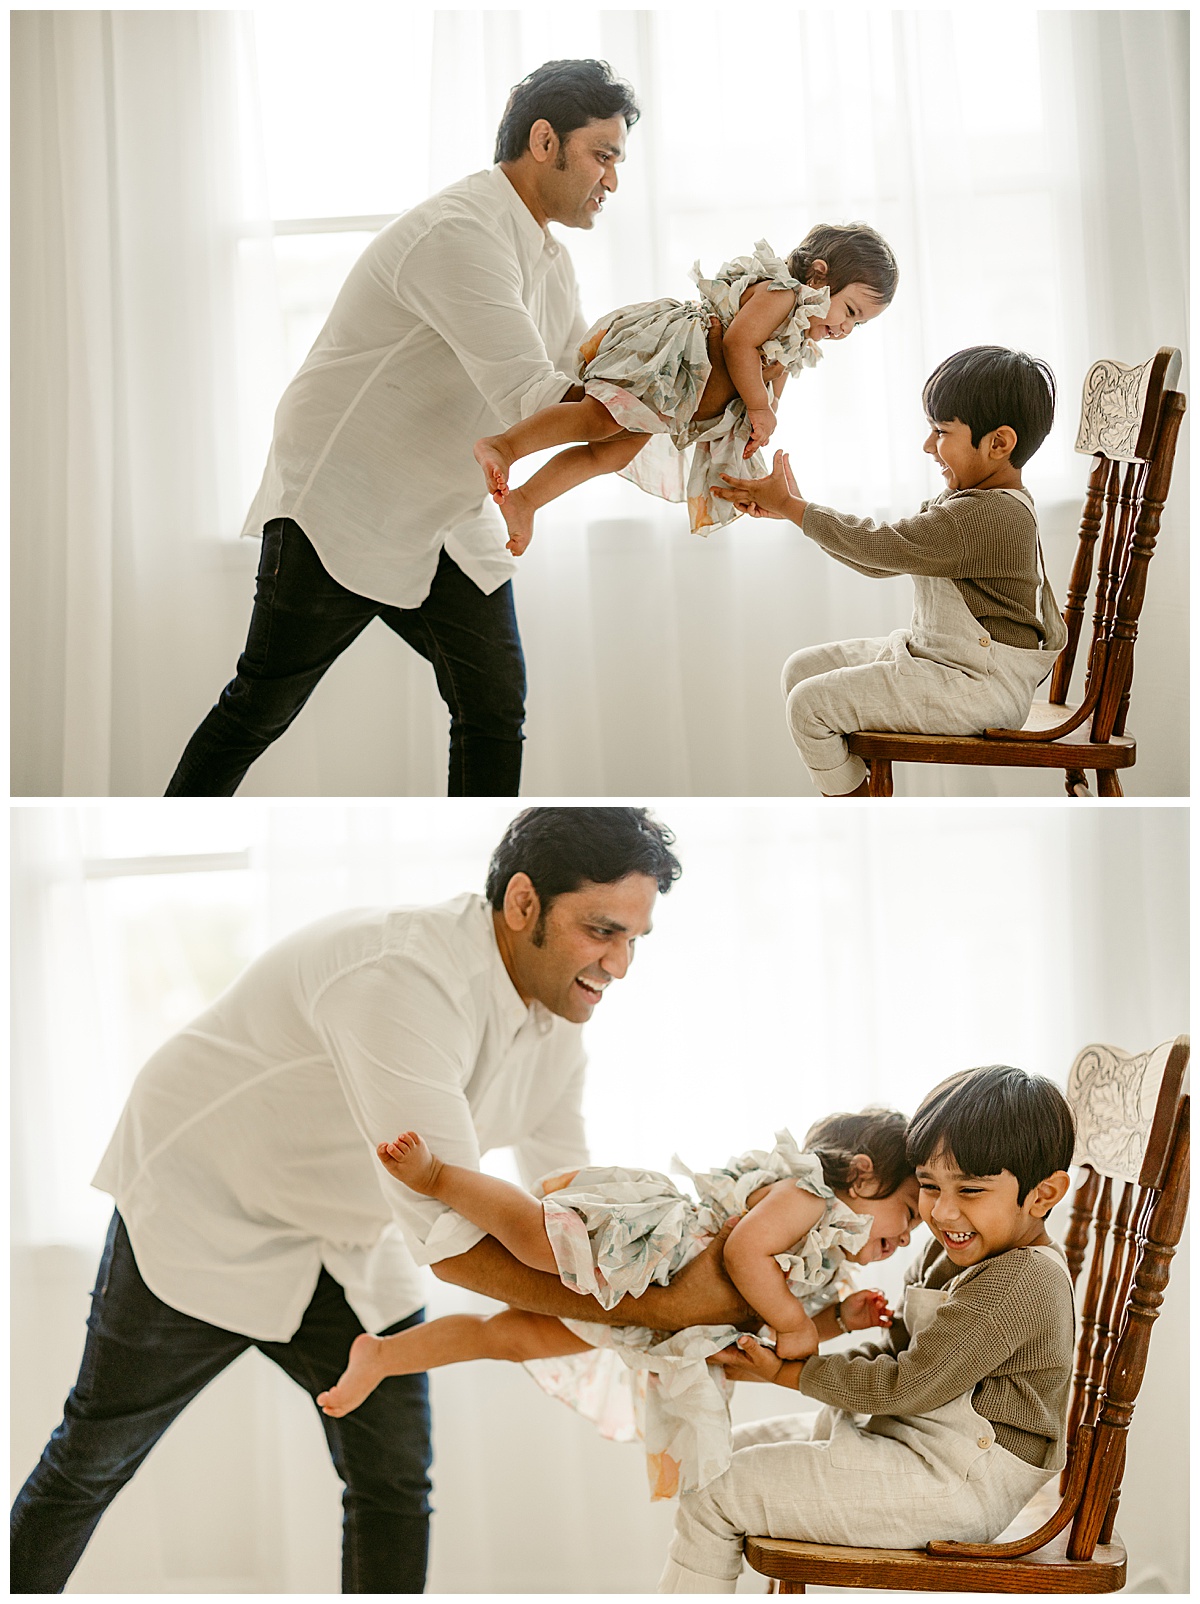 Dad plays with their children during their Unposed Lifestyle Shoot